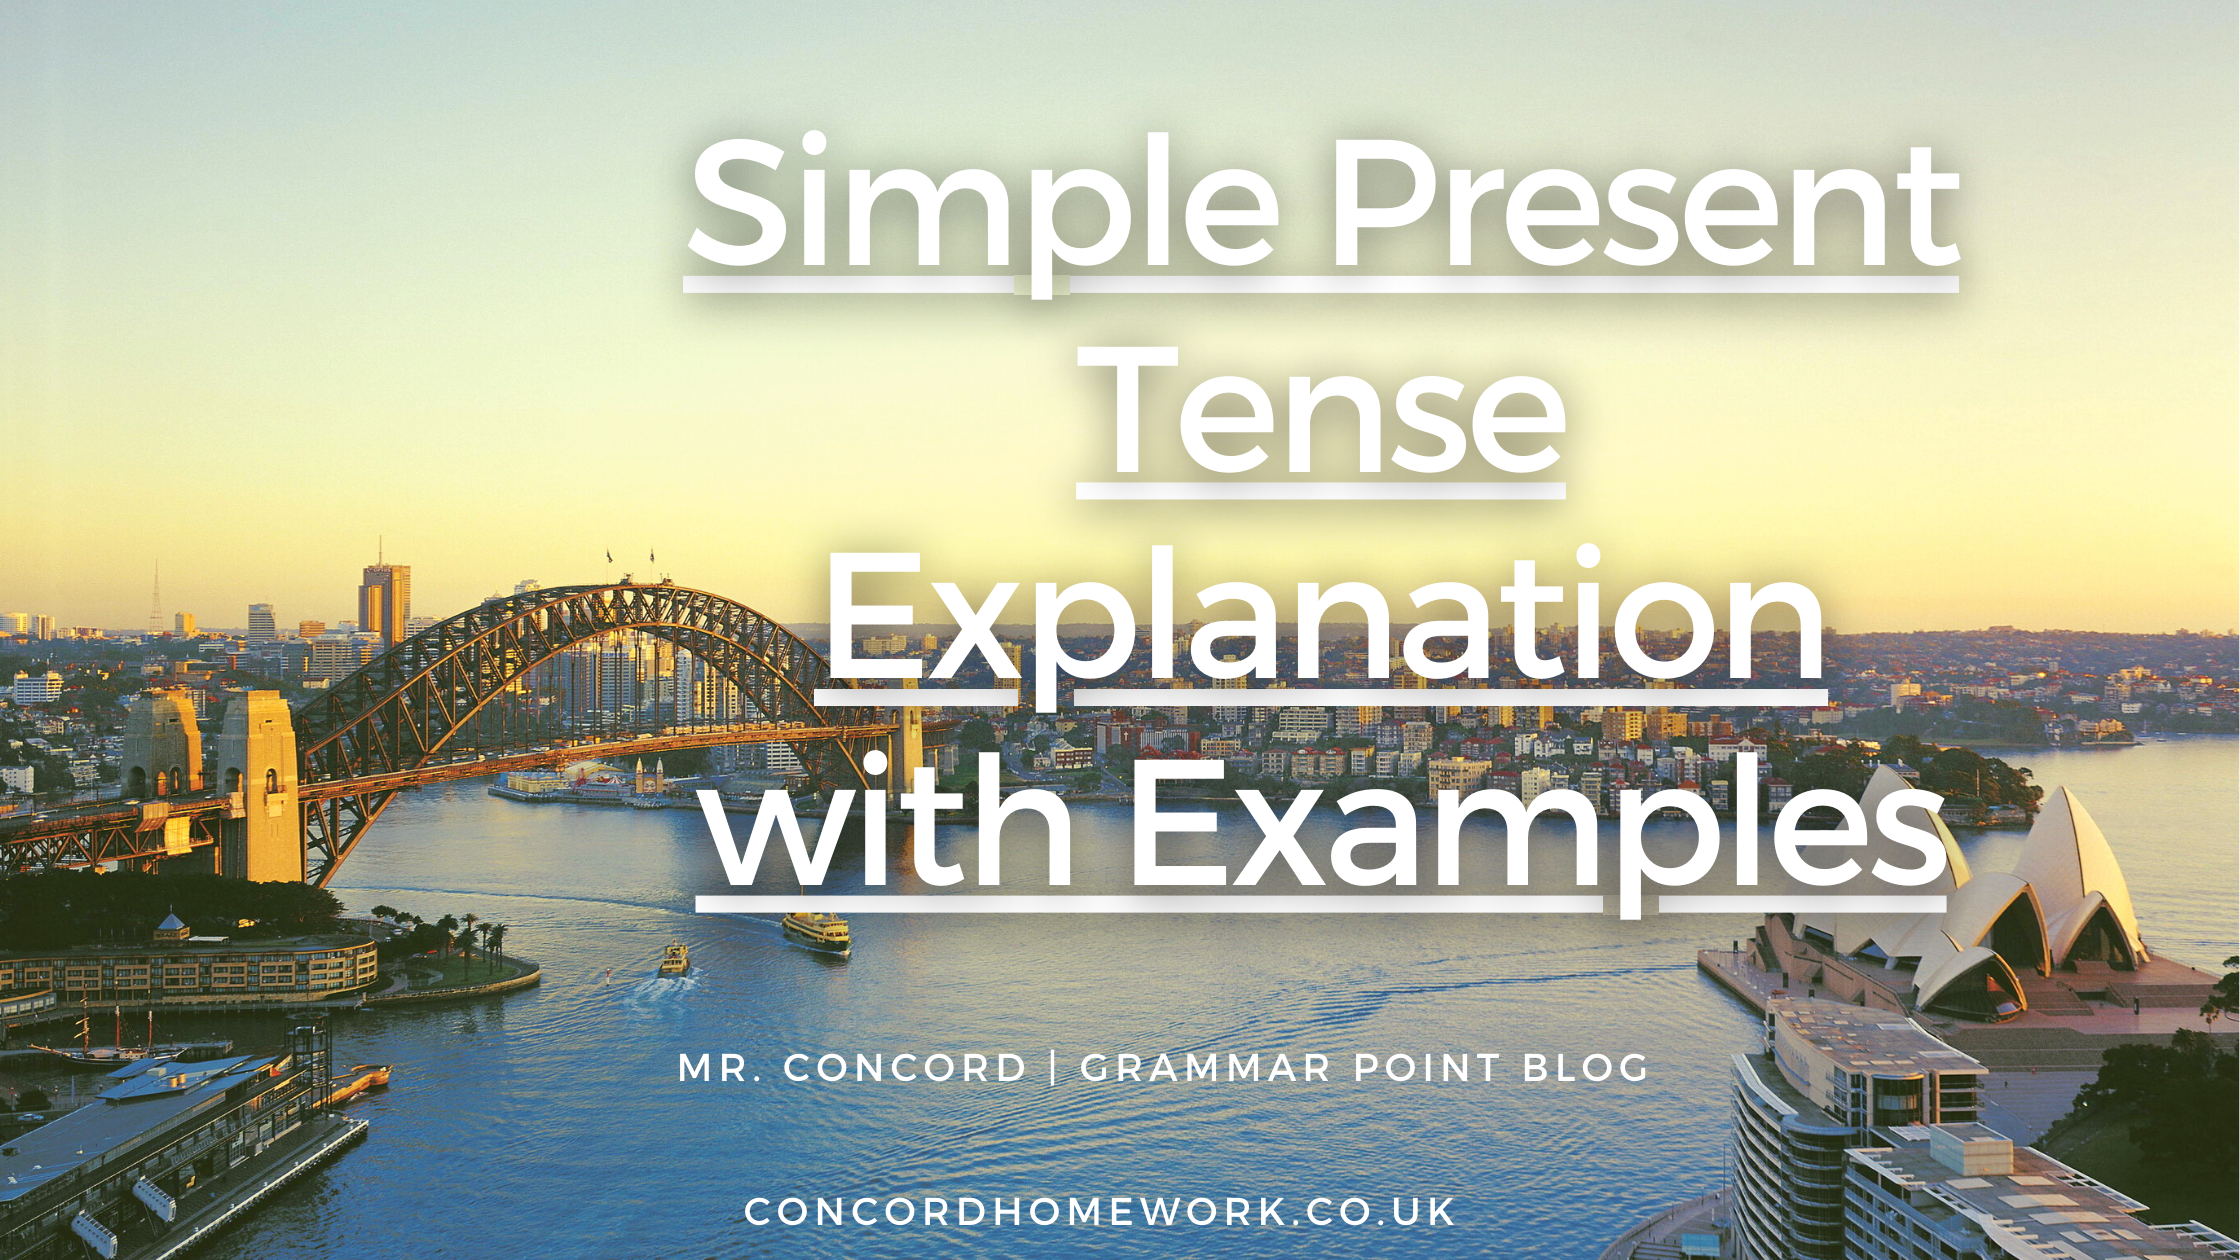 Simple Present Tense Explanation with Examples